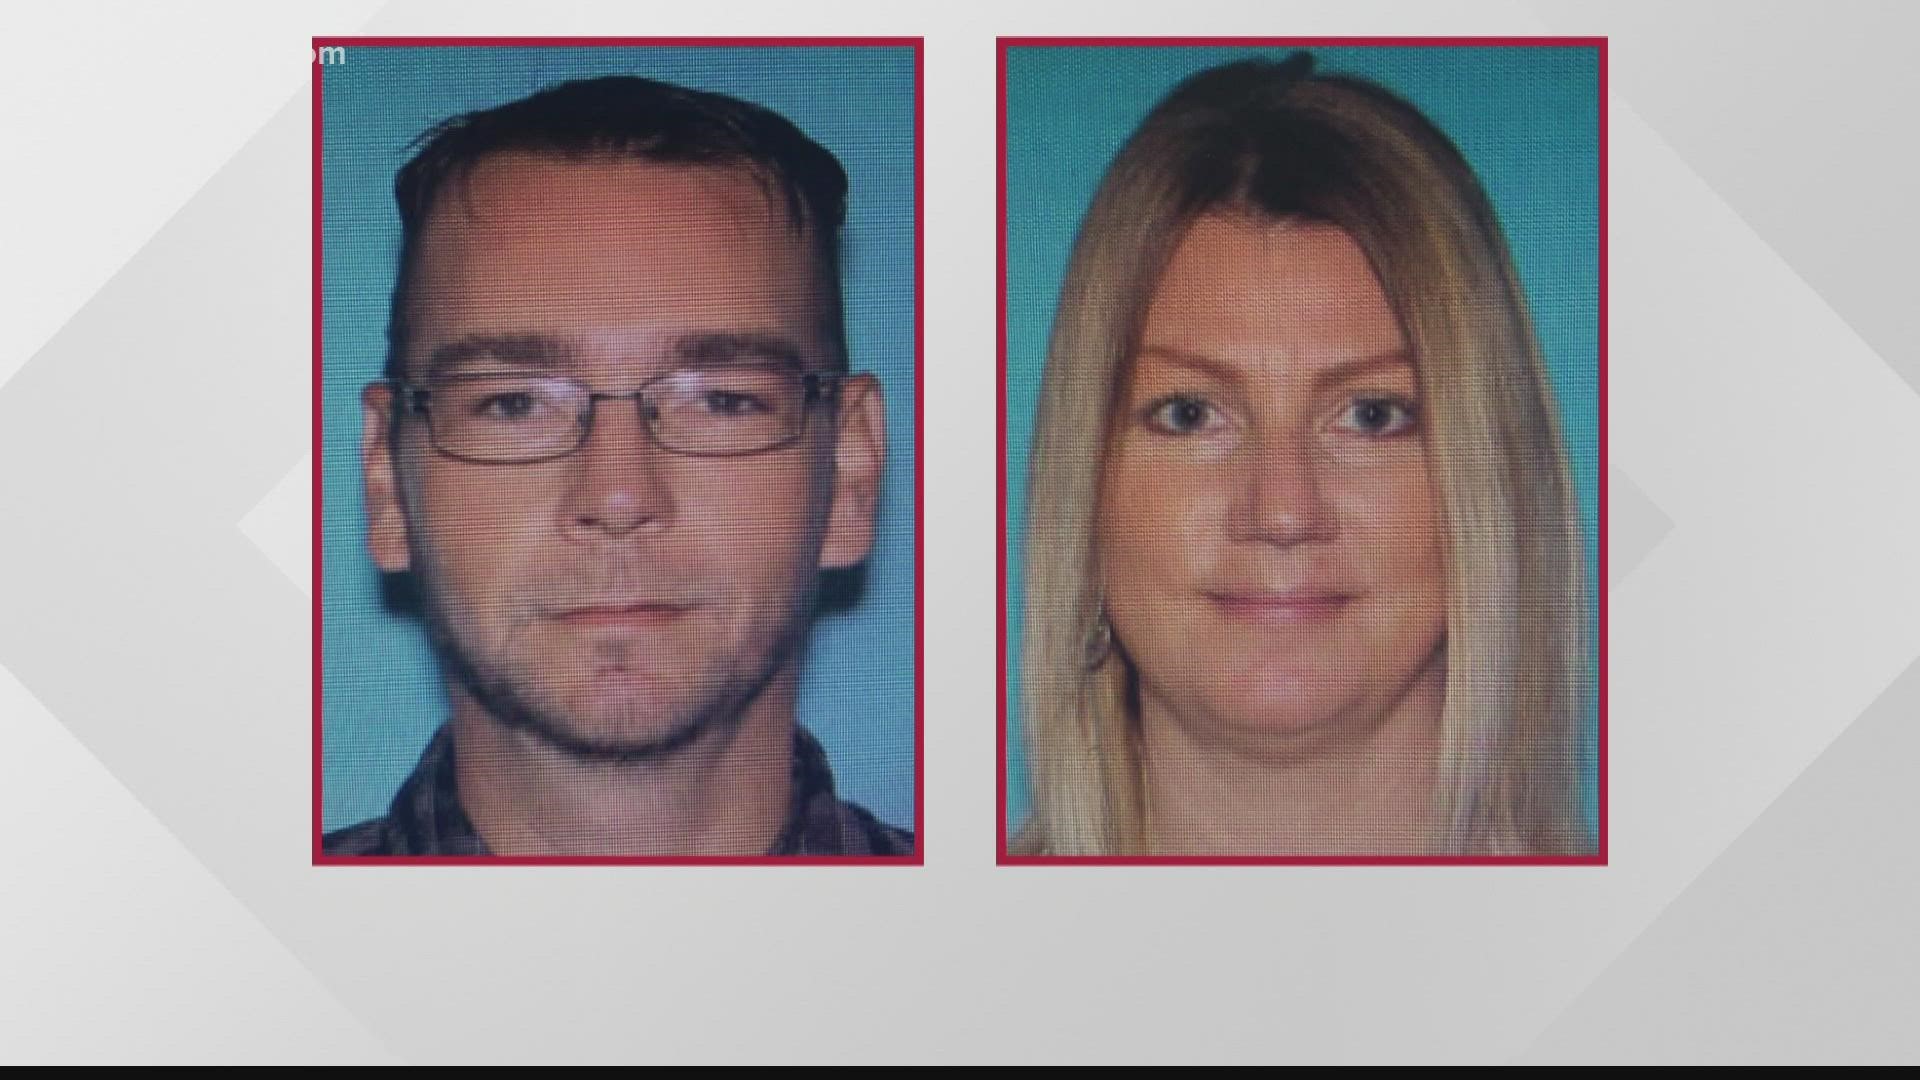 James and Jennifer Crumbley were charged with four counts each of involuntary manslaughter. They both reportedly lived in Jacksonville for several years.